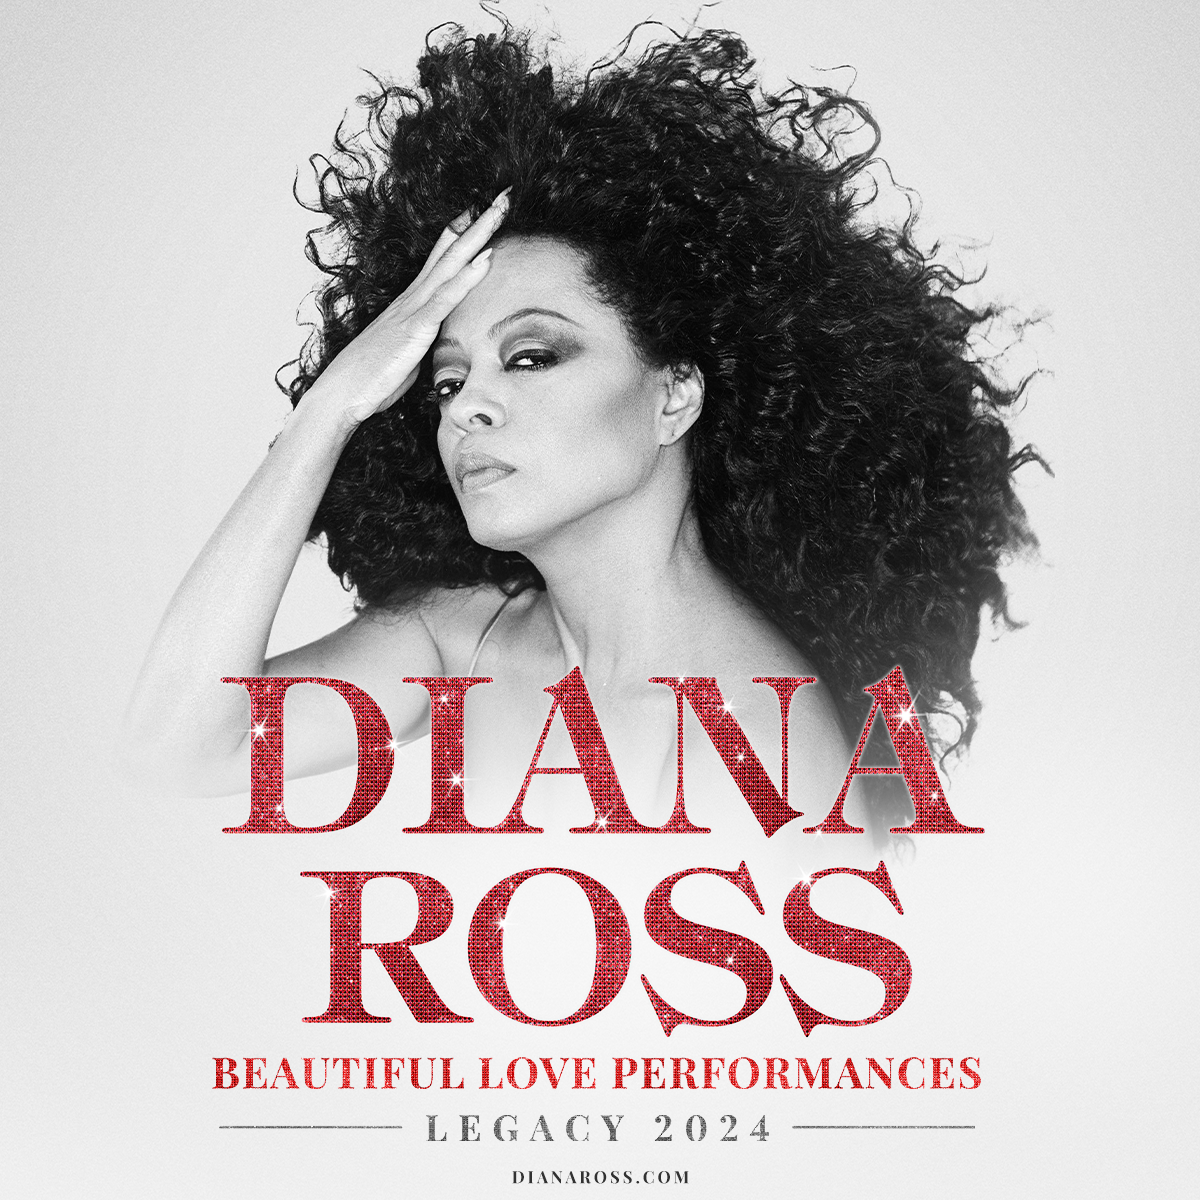 DIANA ROSS TO PERFORM AT ALTRIA THEATER